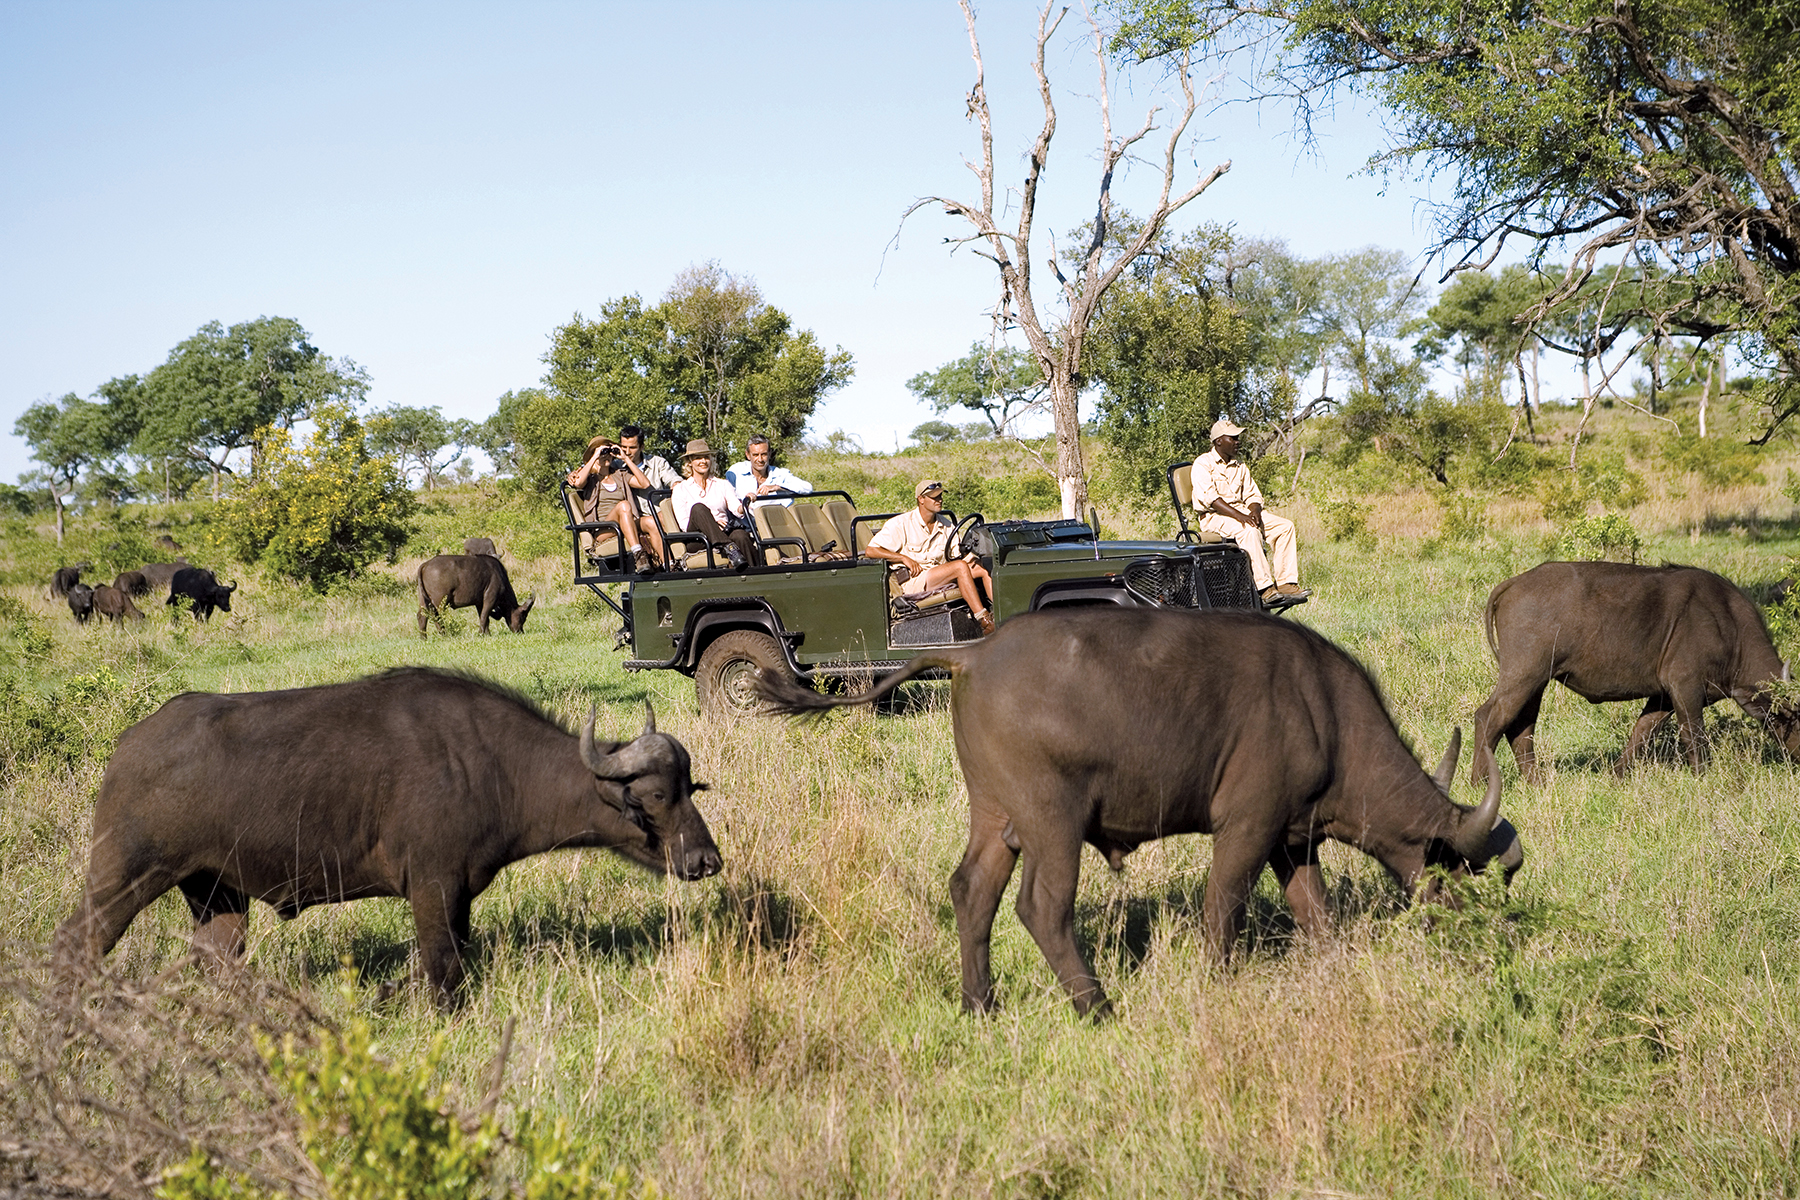 Travelers ridding in a safari vehicle during a game drive